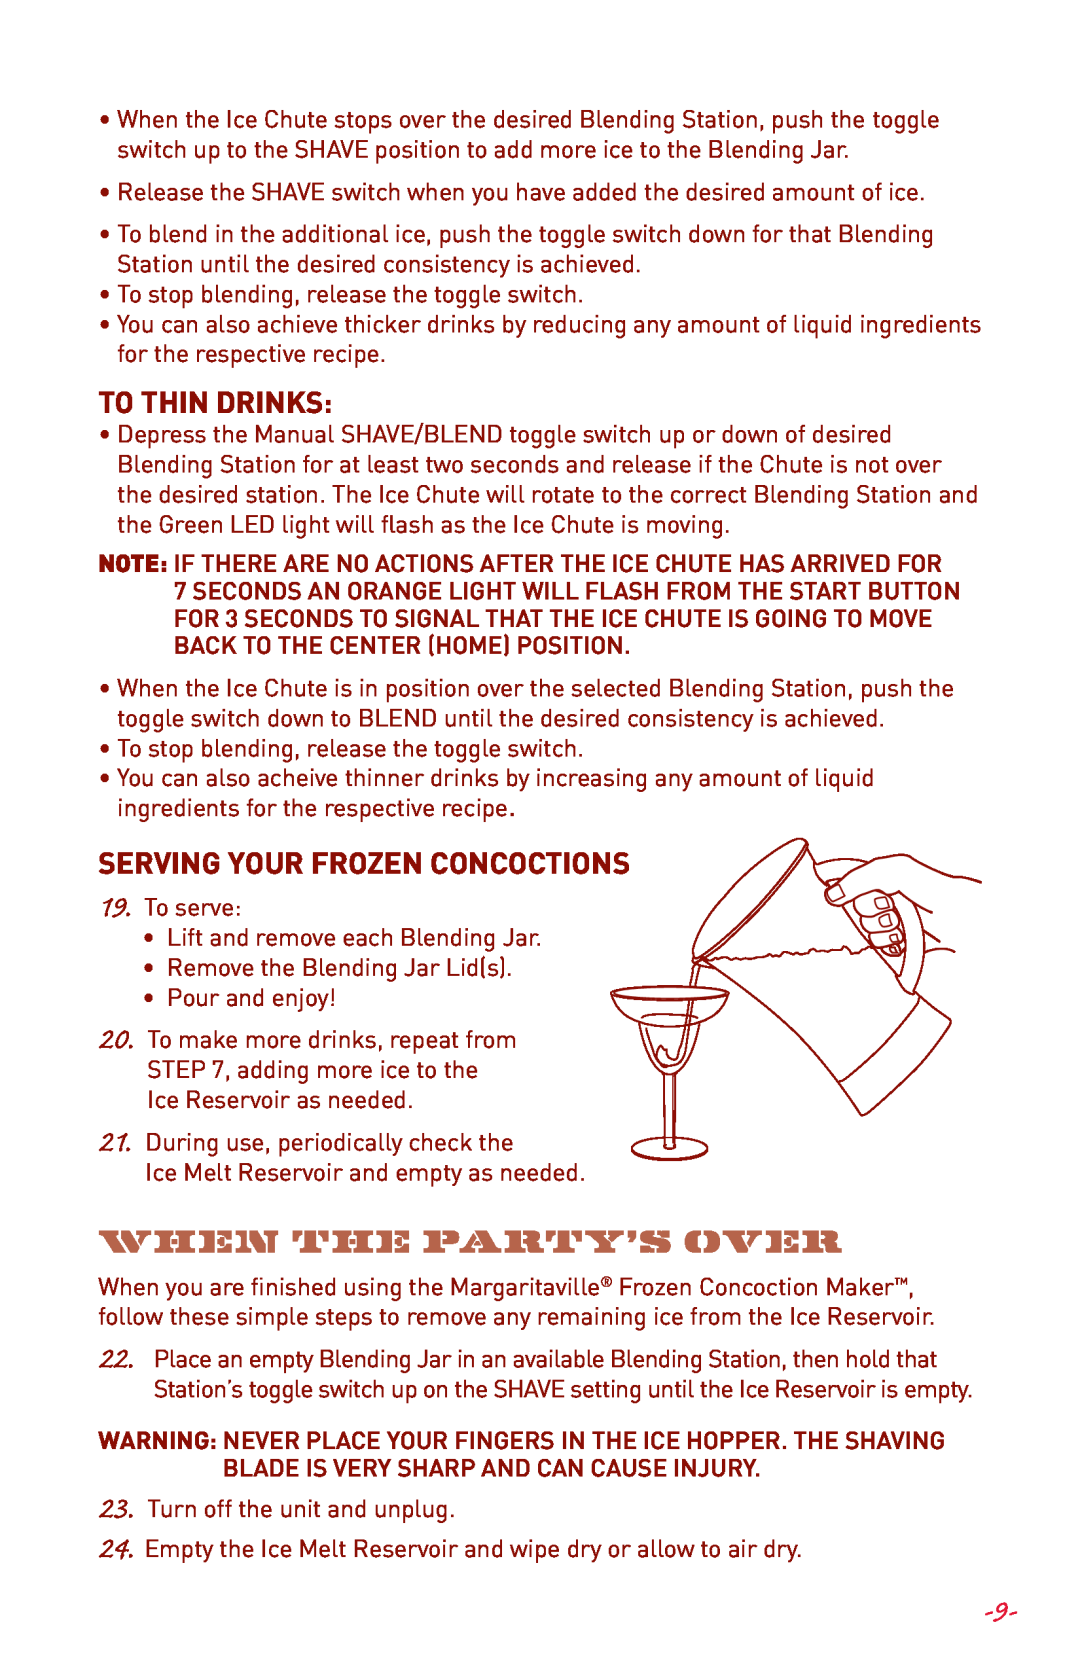 Margaritaville DM3000 user manual When the Party’s Over, To Thin Drinks, Serving Your Frozen Concoctions 